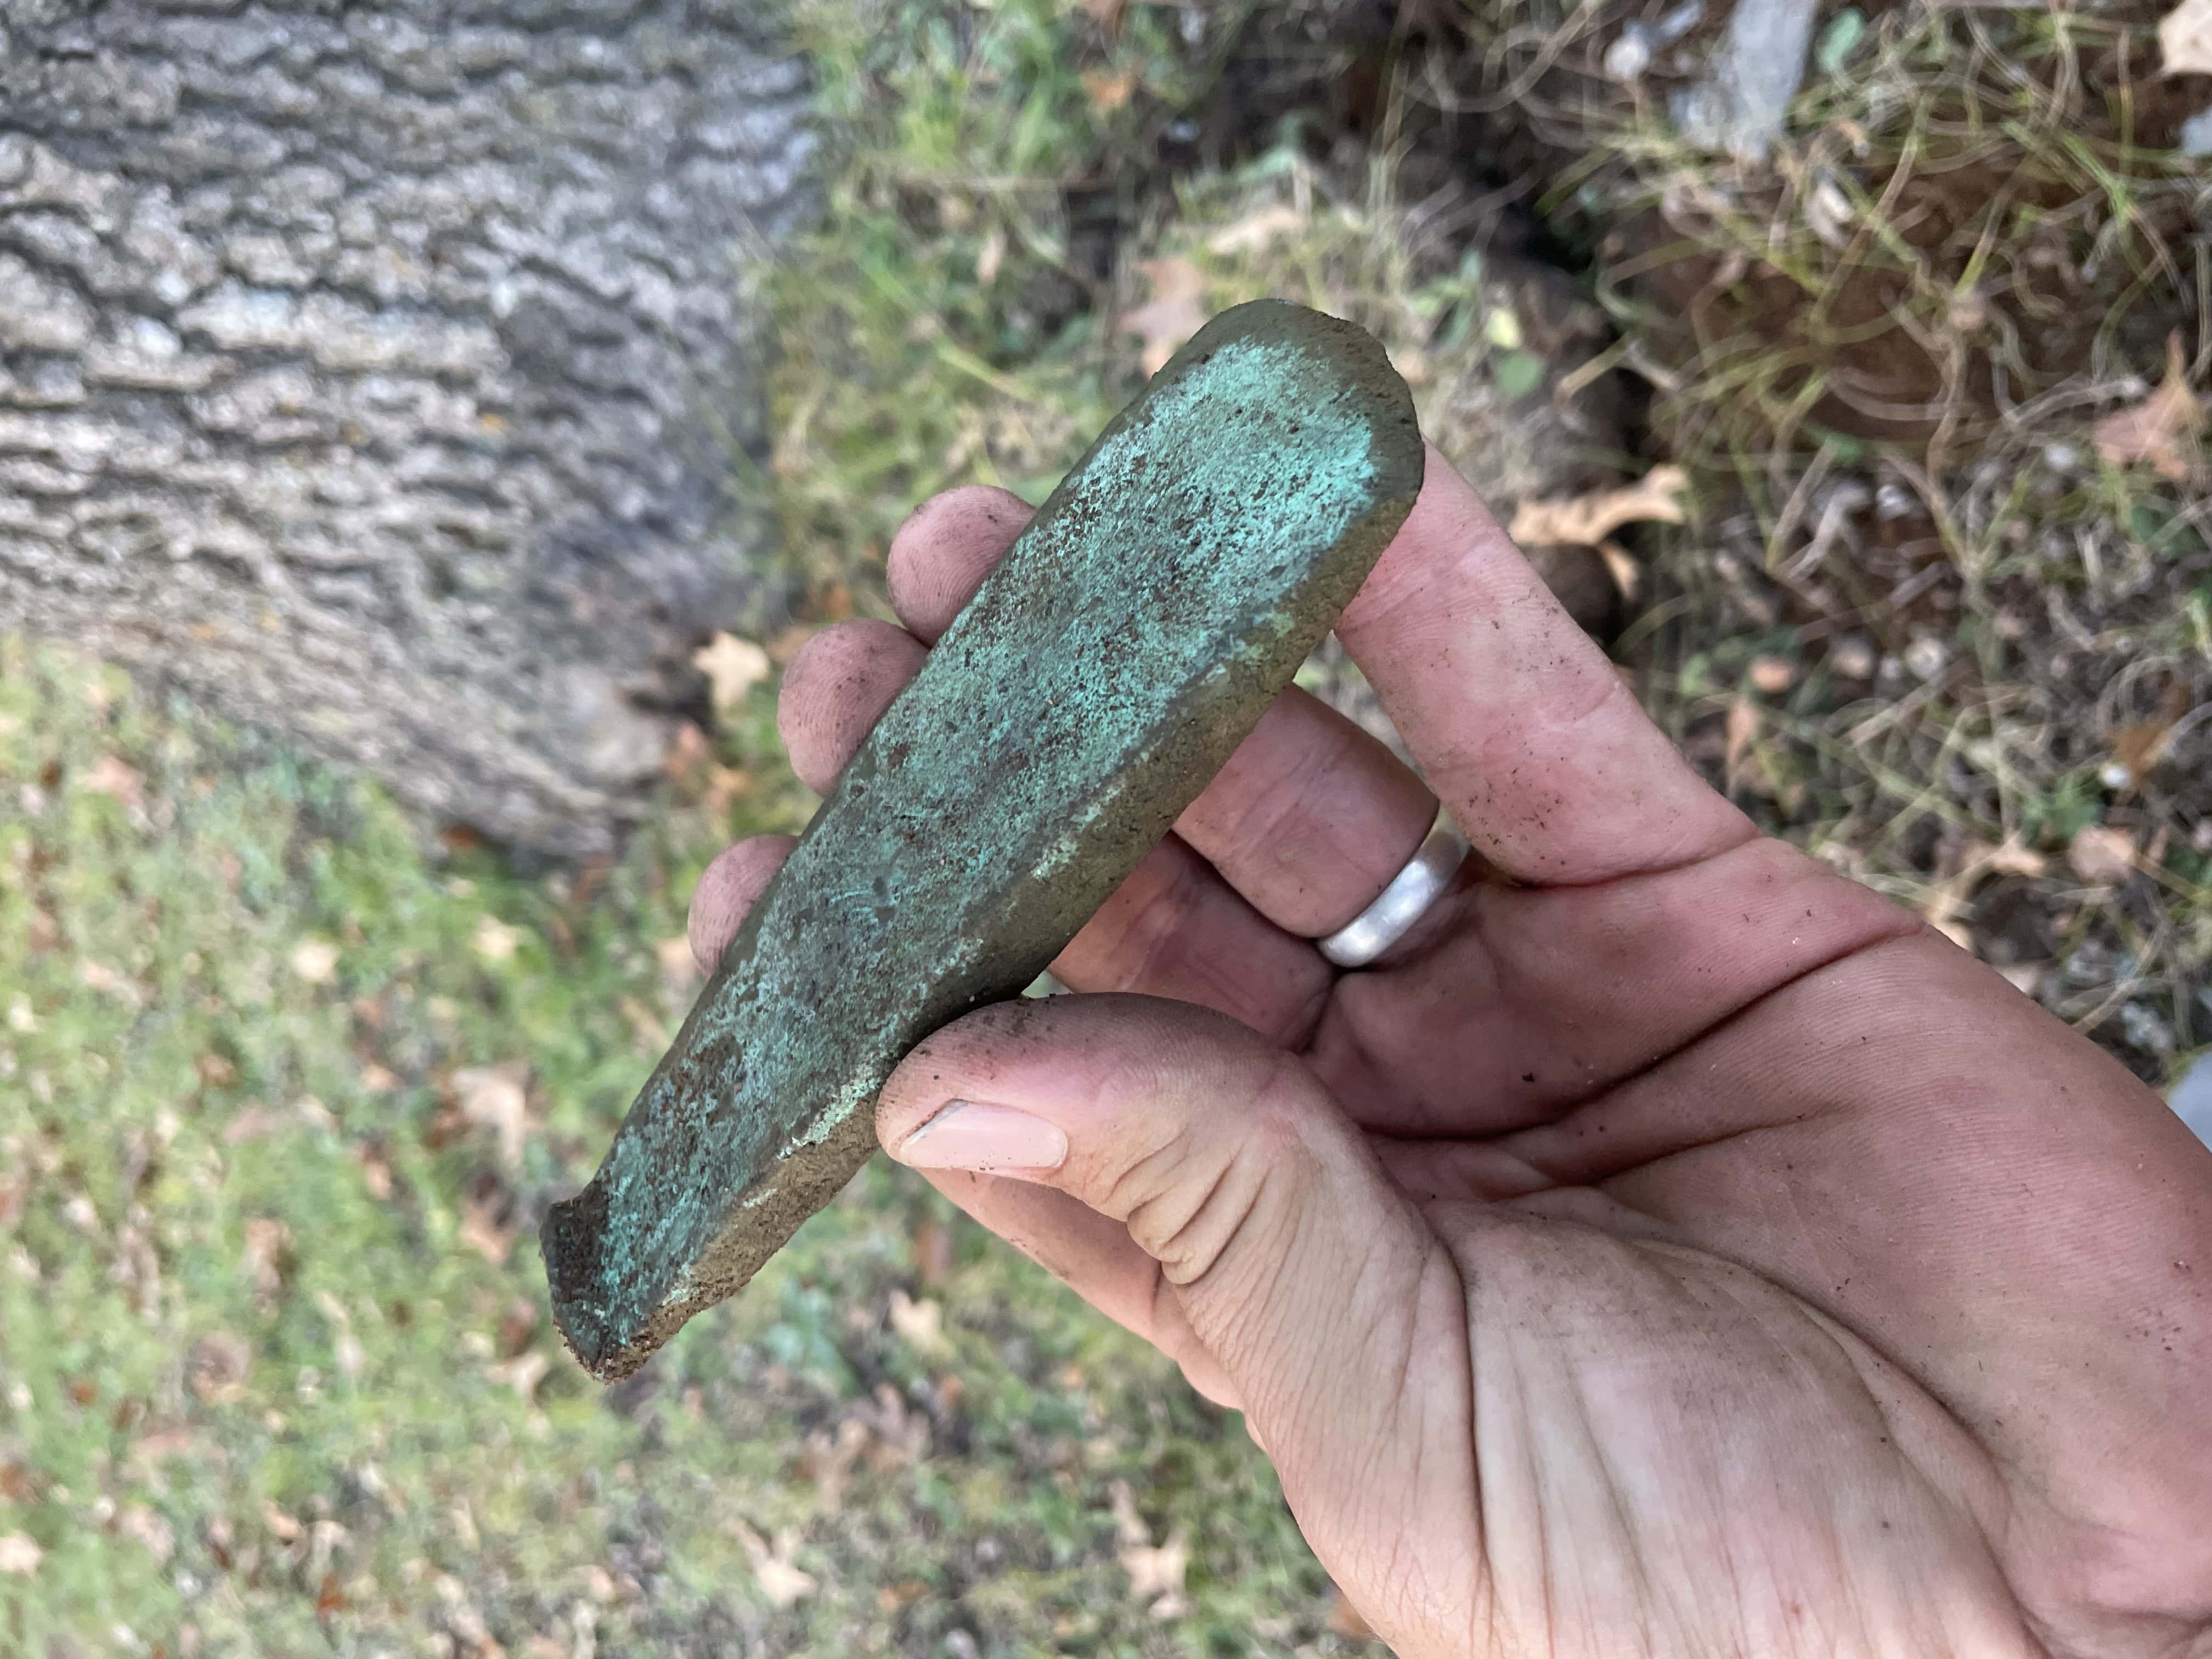 Prehistoric Copper Implement with Green Patina Across Surface Held in a Hand with Grassy Park and Tree Blurry in Background